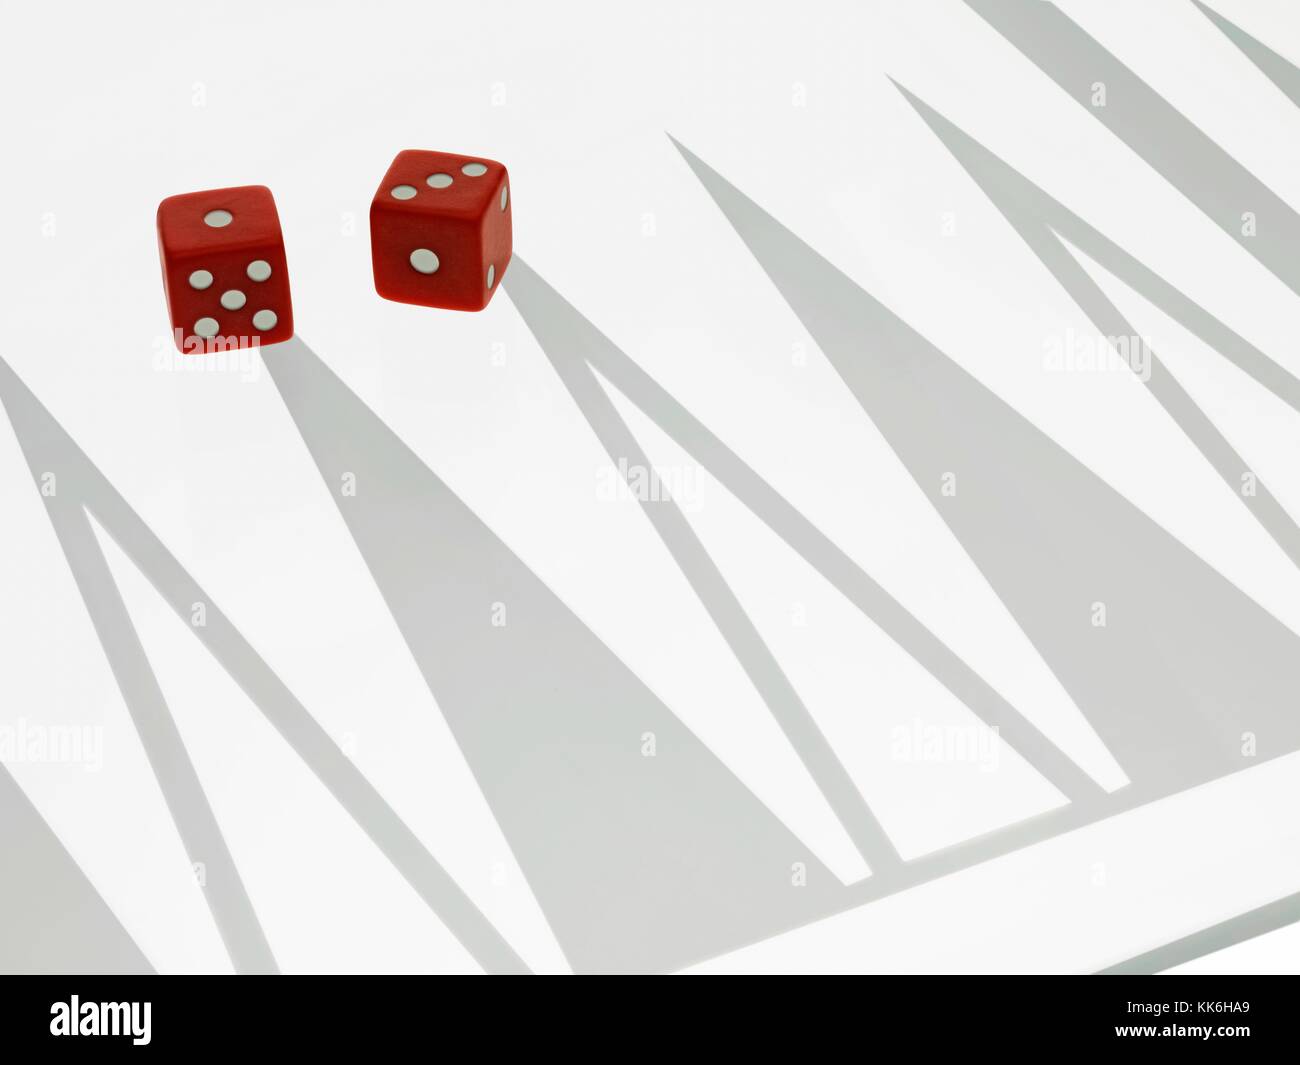 close up shot of two red dice Stock Photo